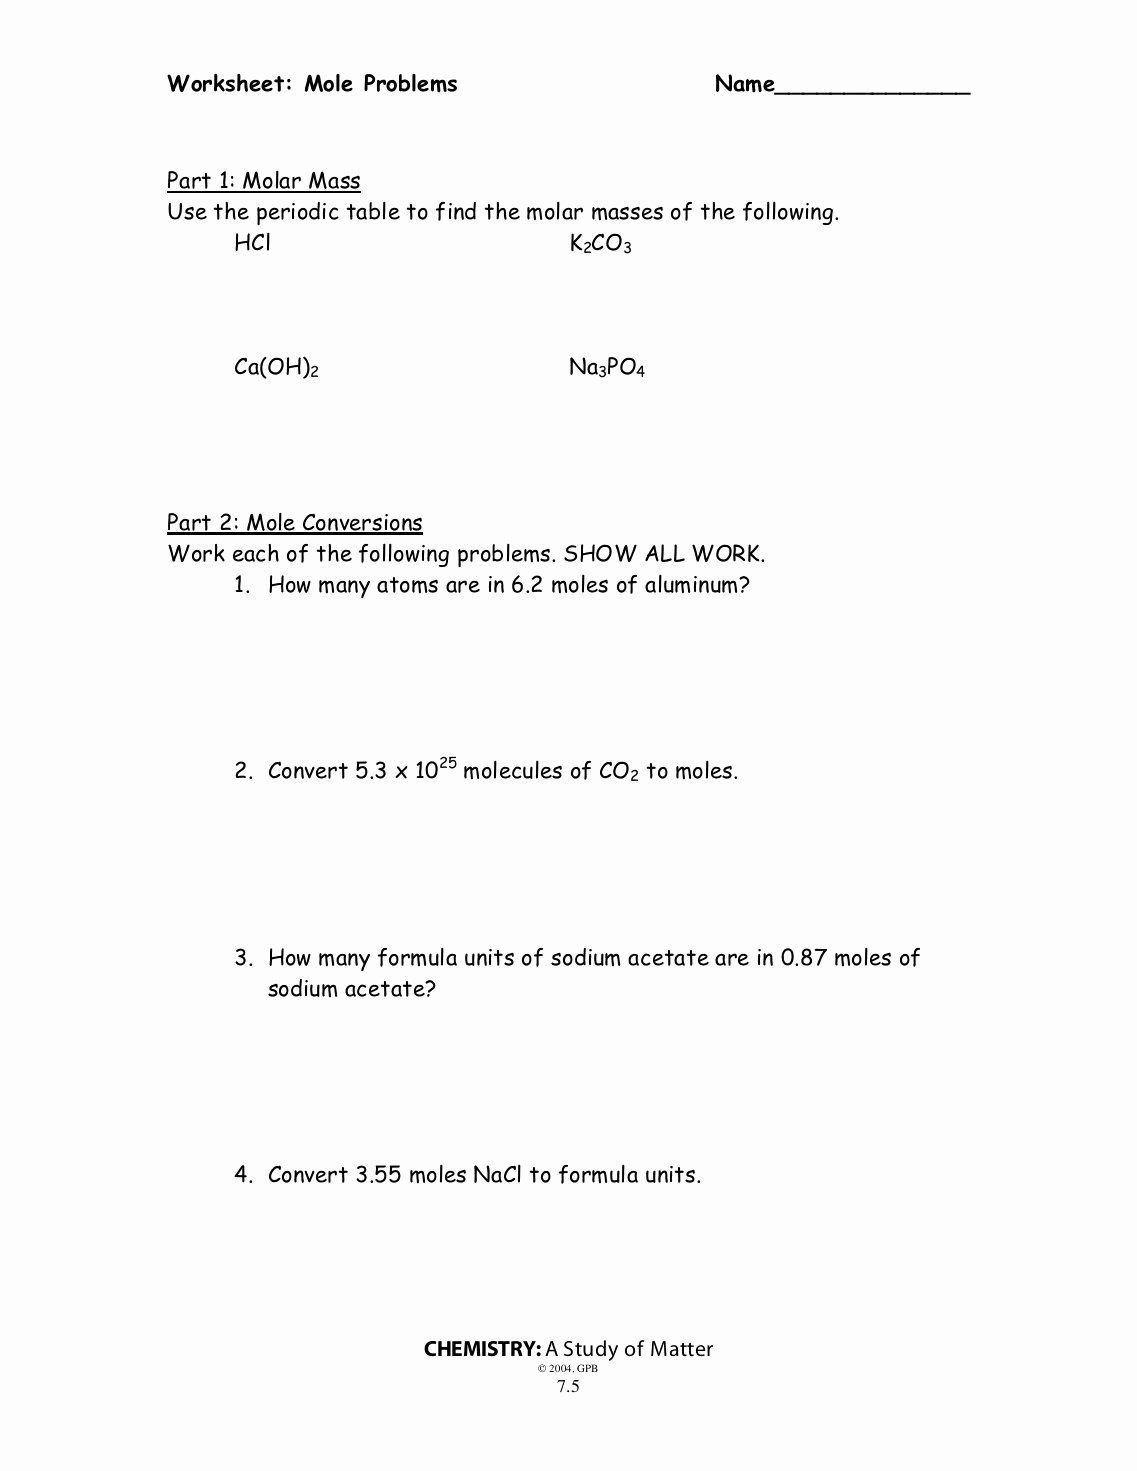 Moles To Grams Worksheet Mole Problems Good States Of Matter As Well As Worksheet Mole Mass Problems